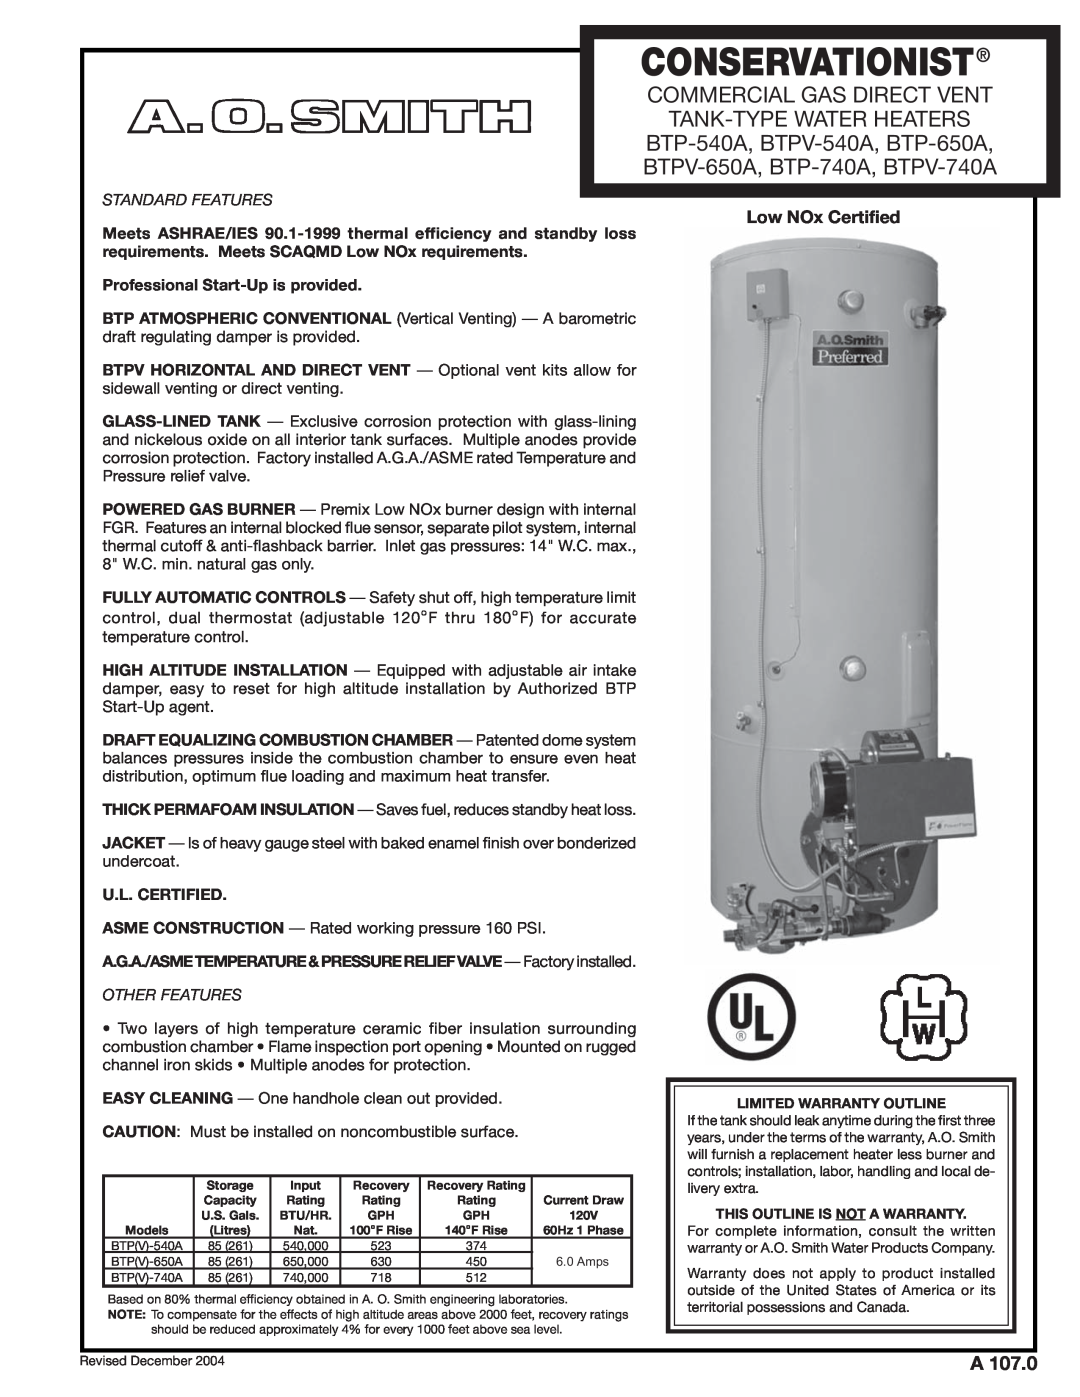 A.O. Smith BTP-540A warranty Low NOx Certified, Conservationist, Commercial Gas Direct Vent Tank-Type Water Heaters 